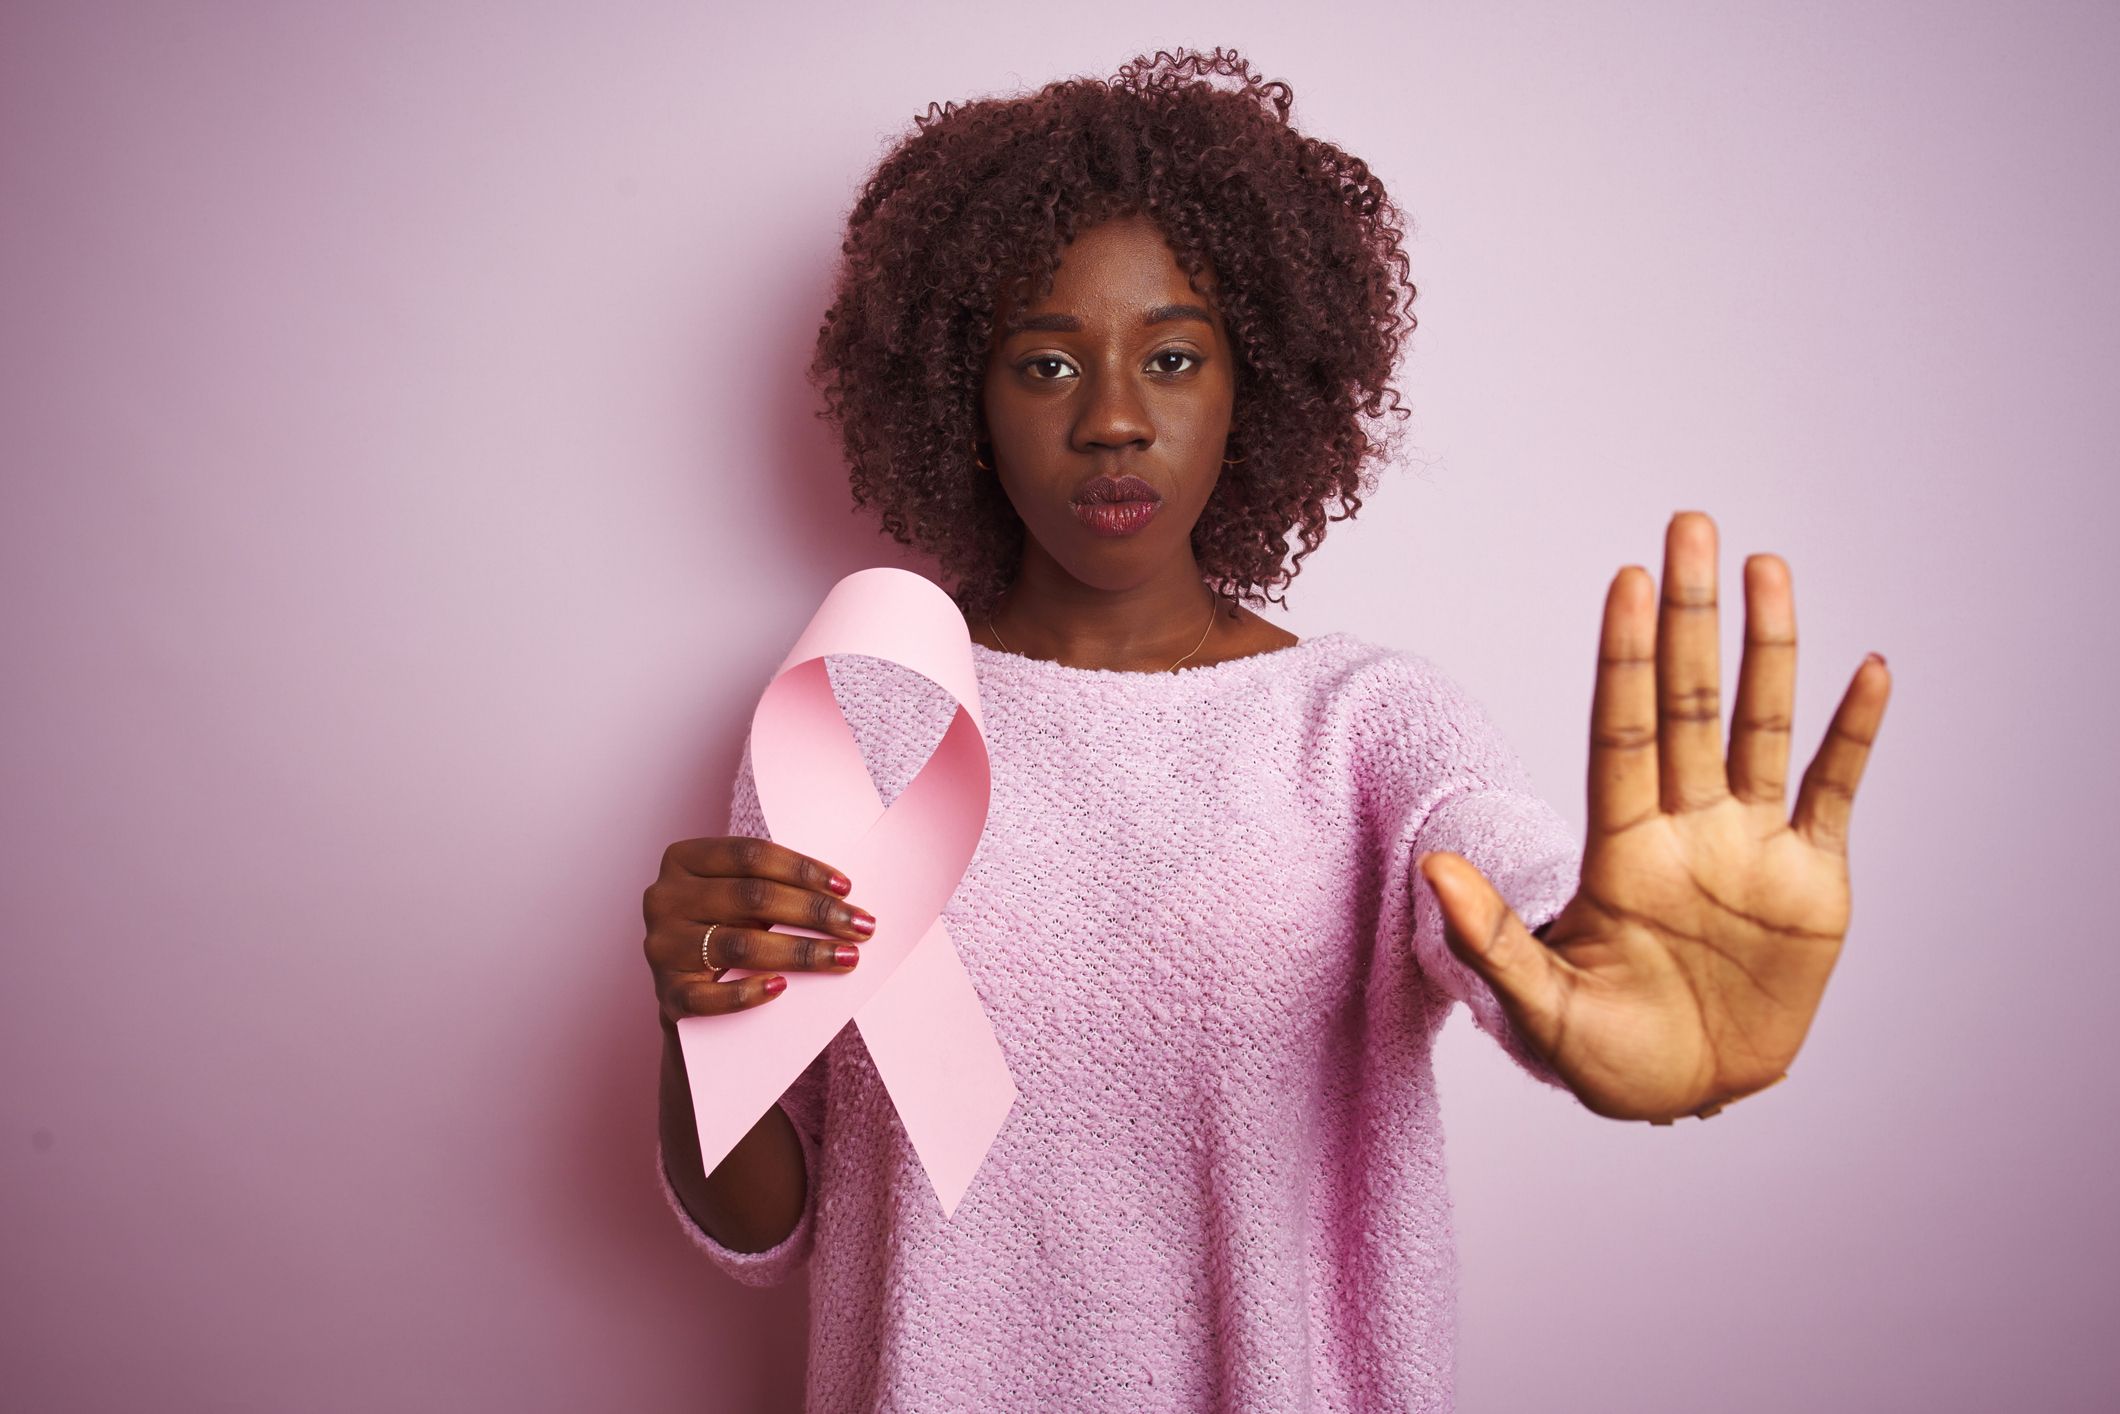 Black women more likely to die from breast cancer, study has found